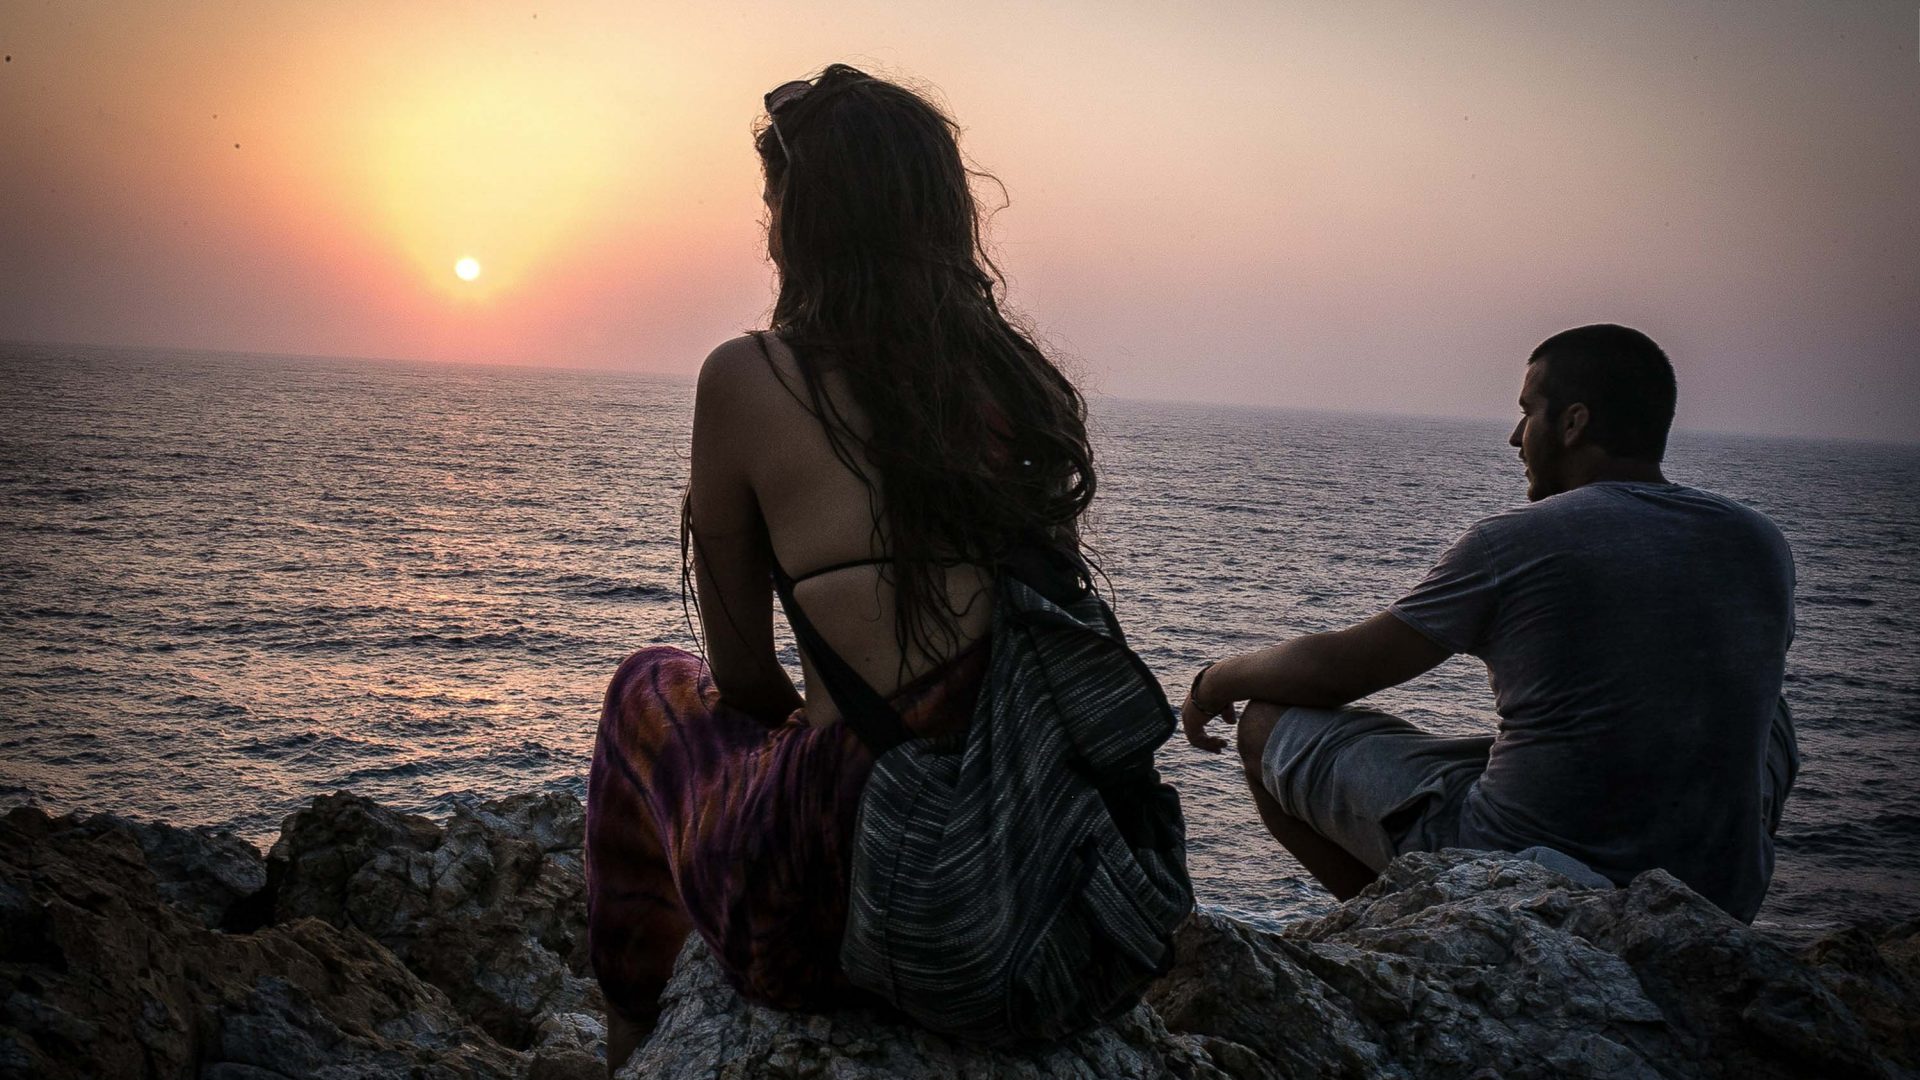 There is no crisis in paradise: Tracing Greece's youth 'hippie trail'